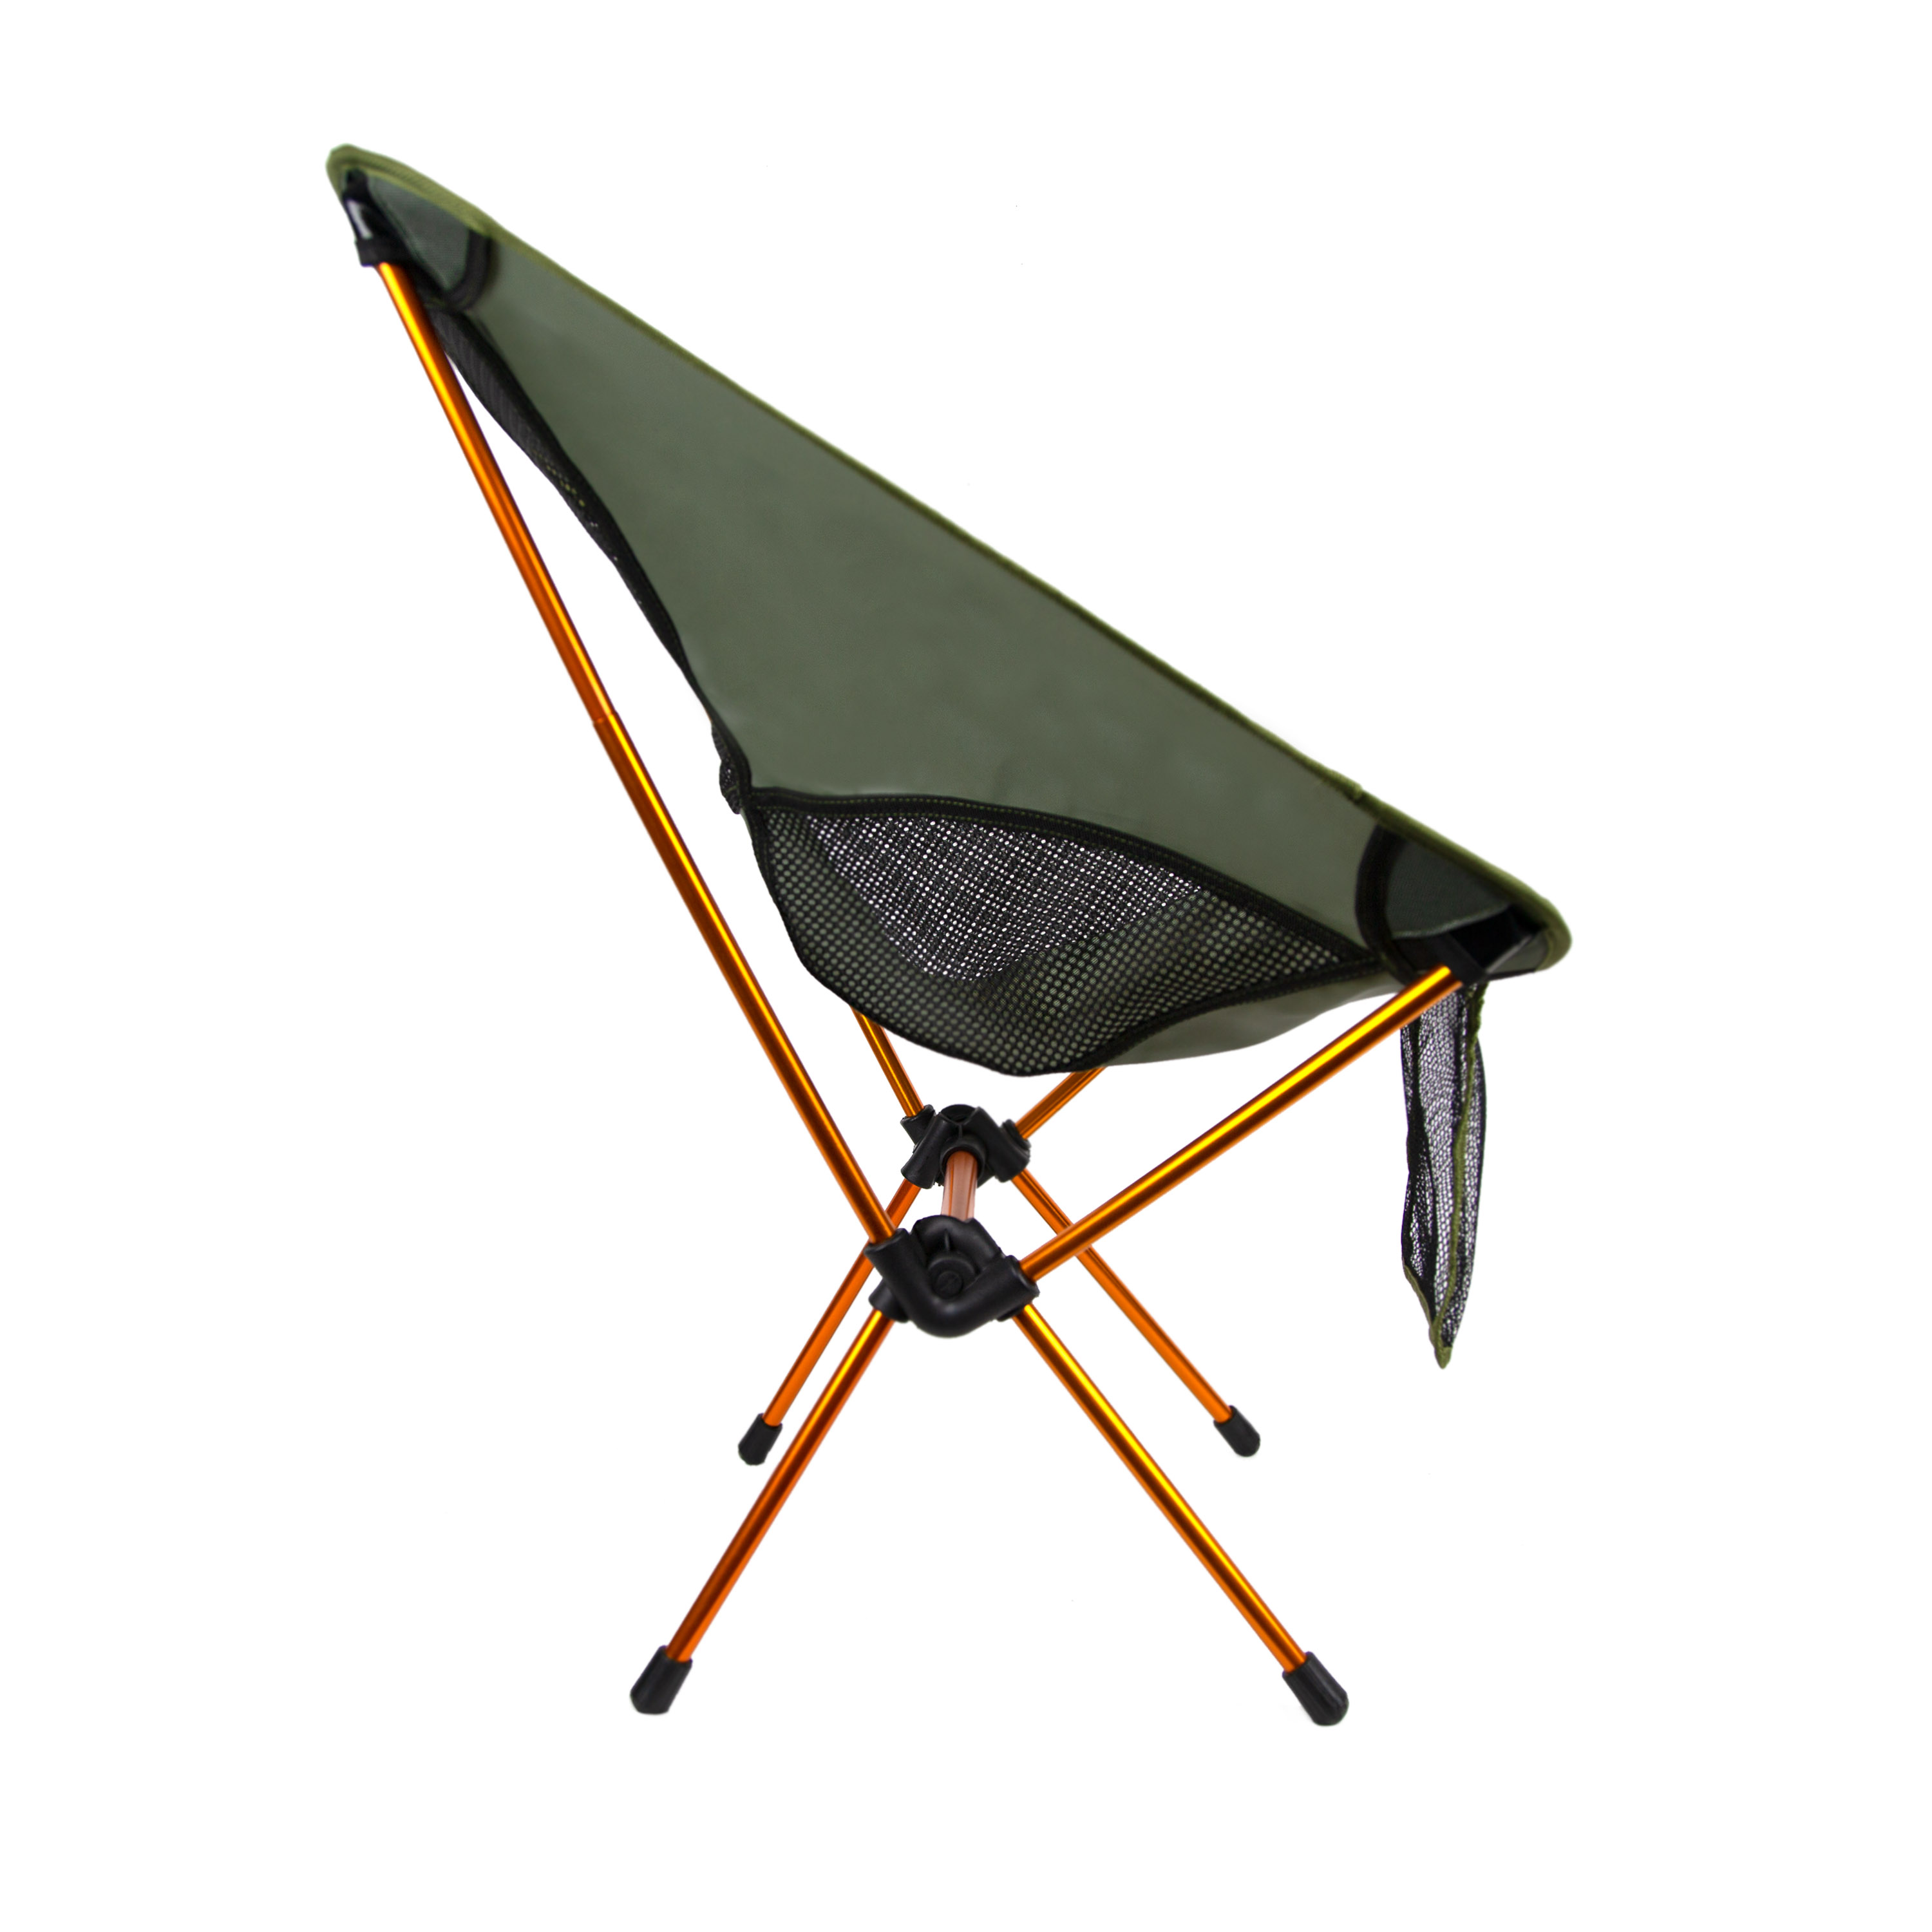 Ozark Trail Himont Compact Camp Lite Chair Set for Camping - Single chair, Green - image 3 of 11